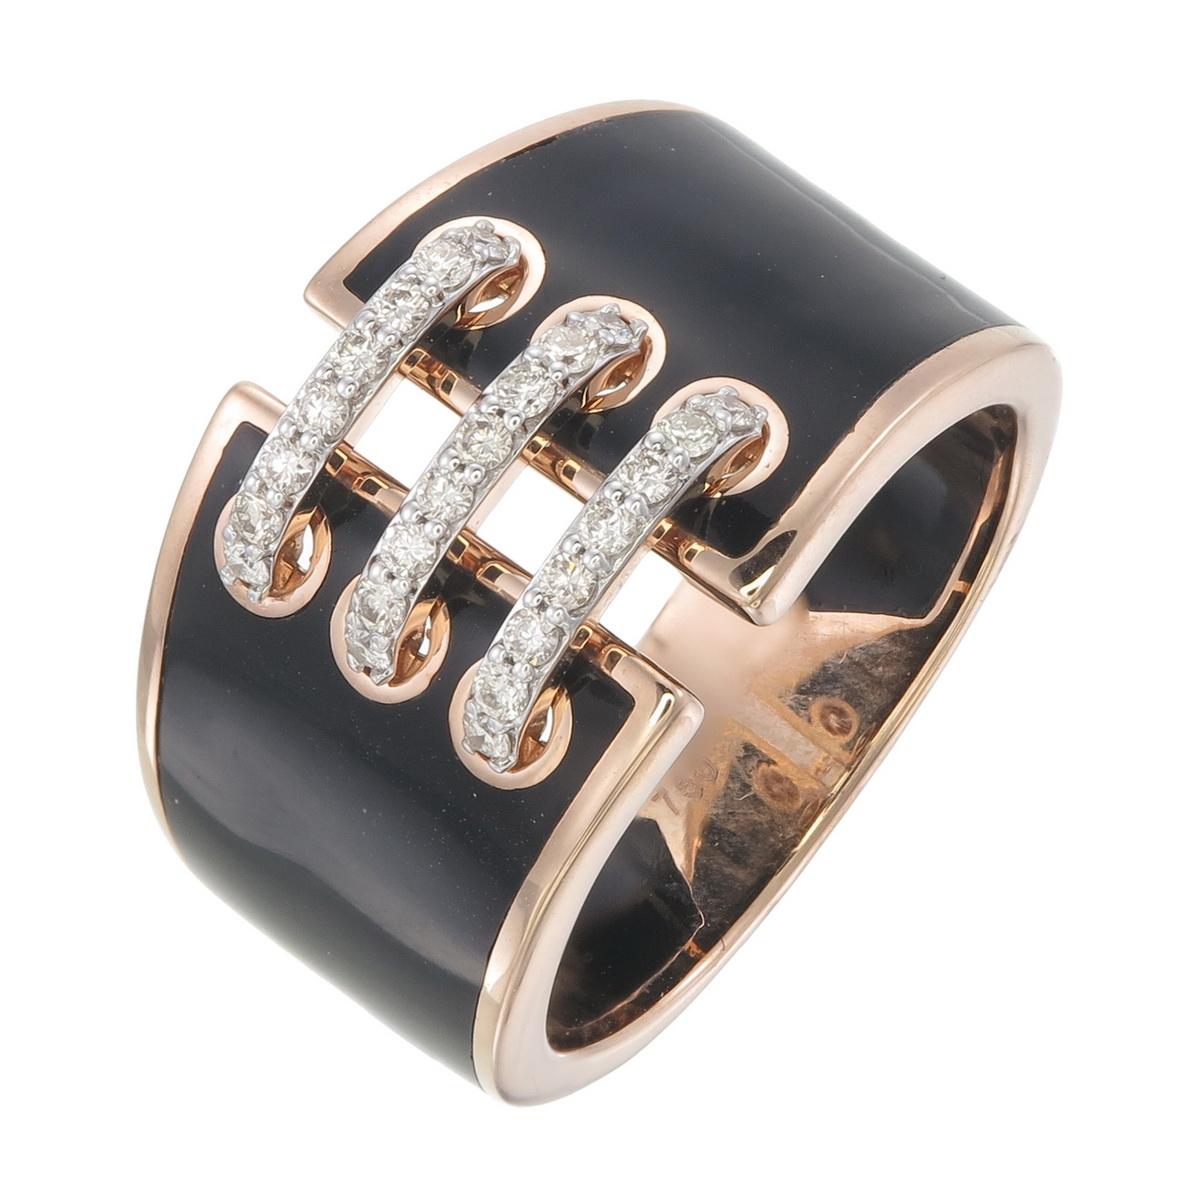 Ring made using Black Ceramic n 18kt Rose gold with natural diamonds For Sale